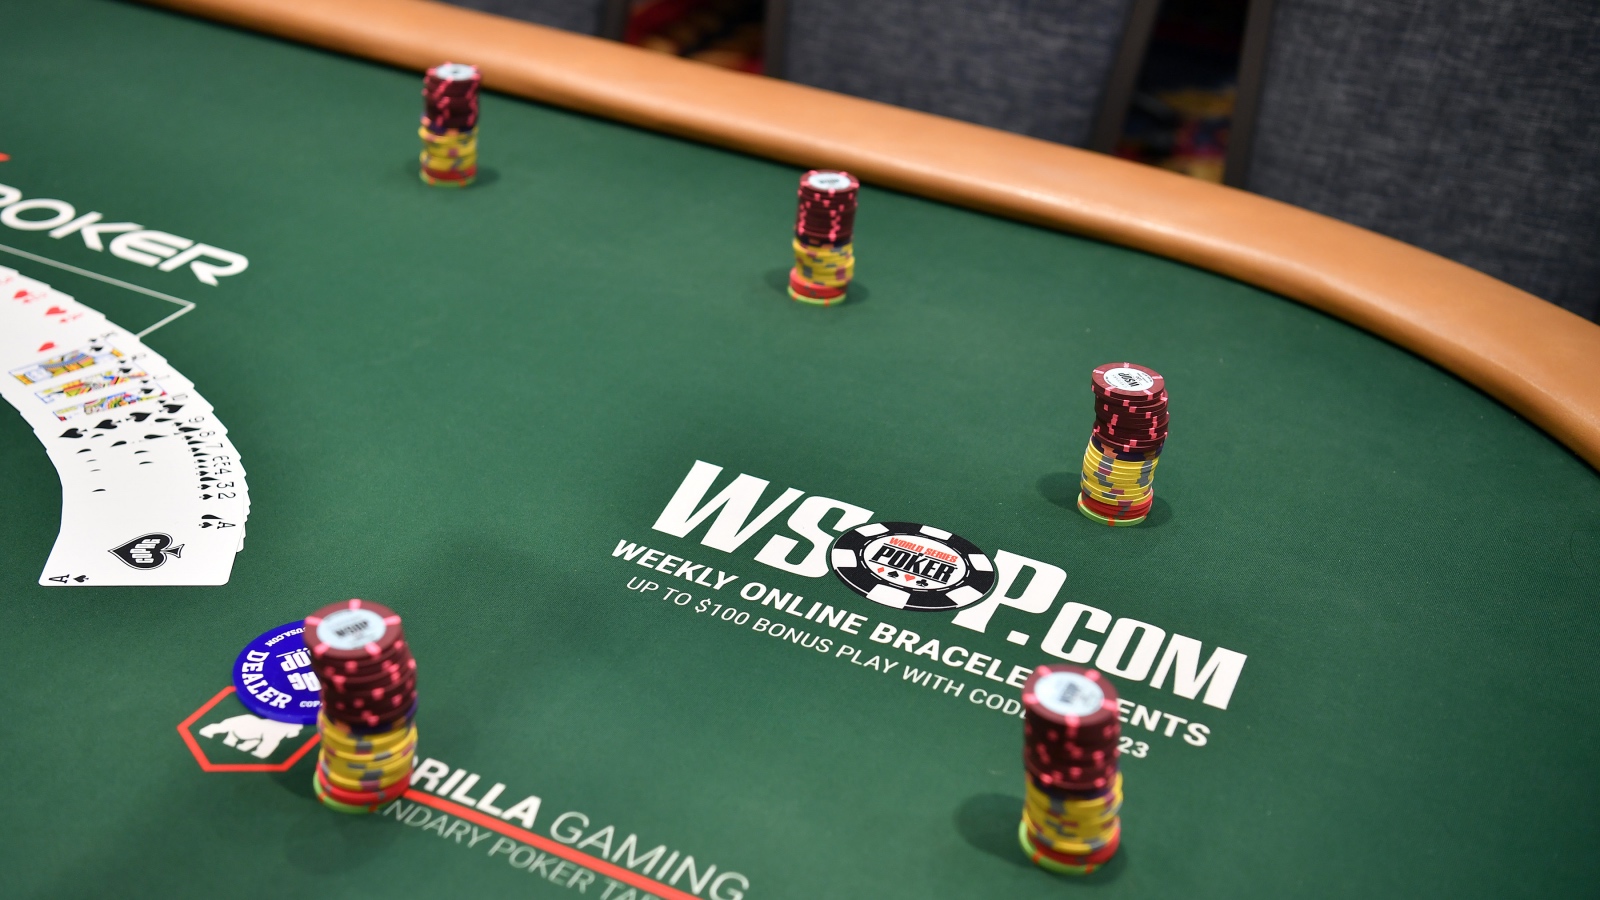 2023 World Series of Poker table and chips